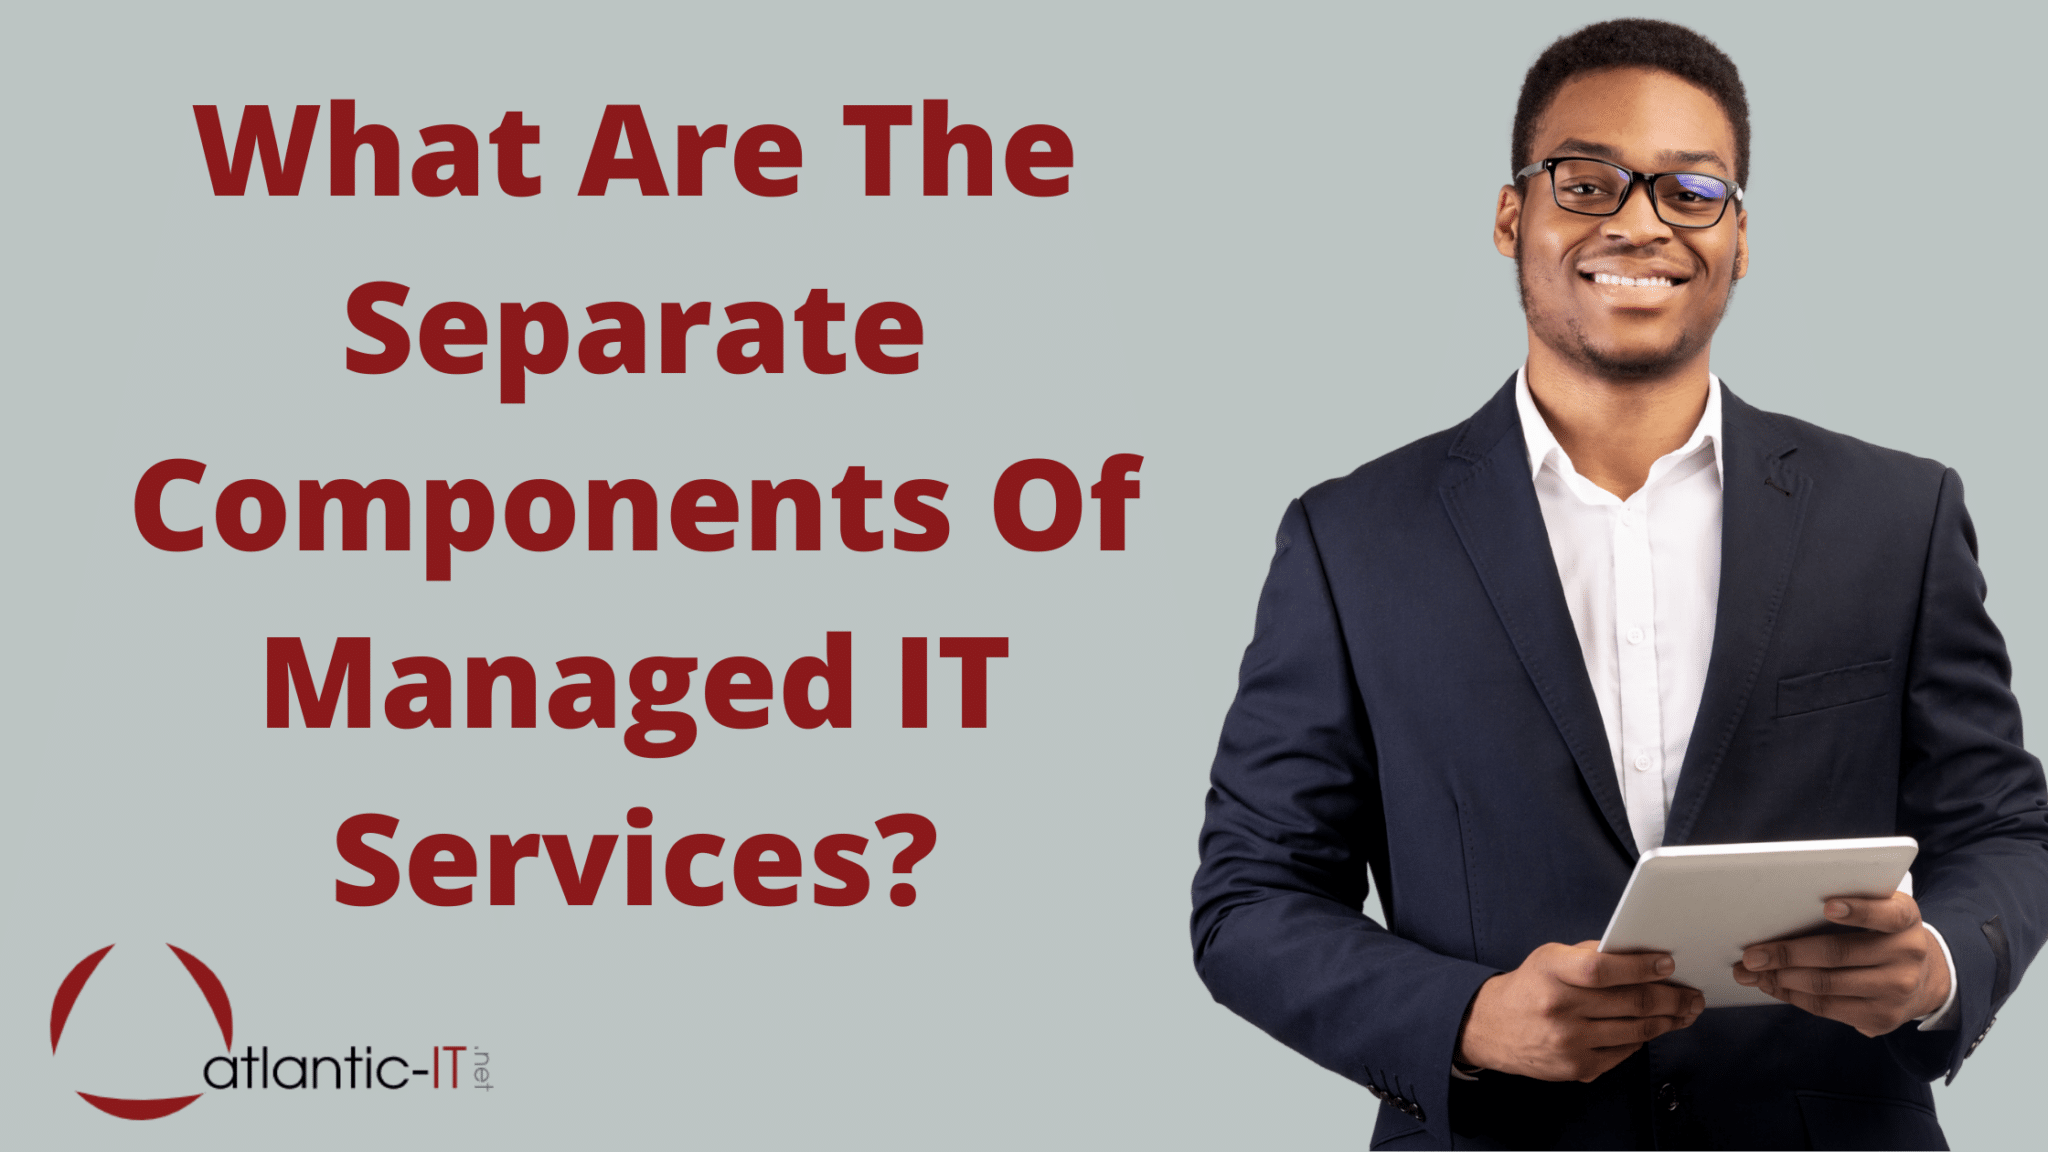 What Are The Separate Components Of Managed IT Services